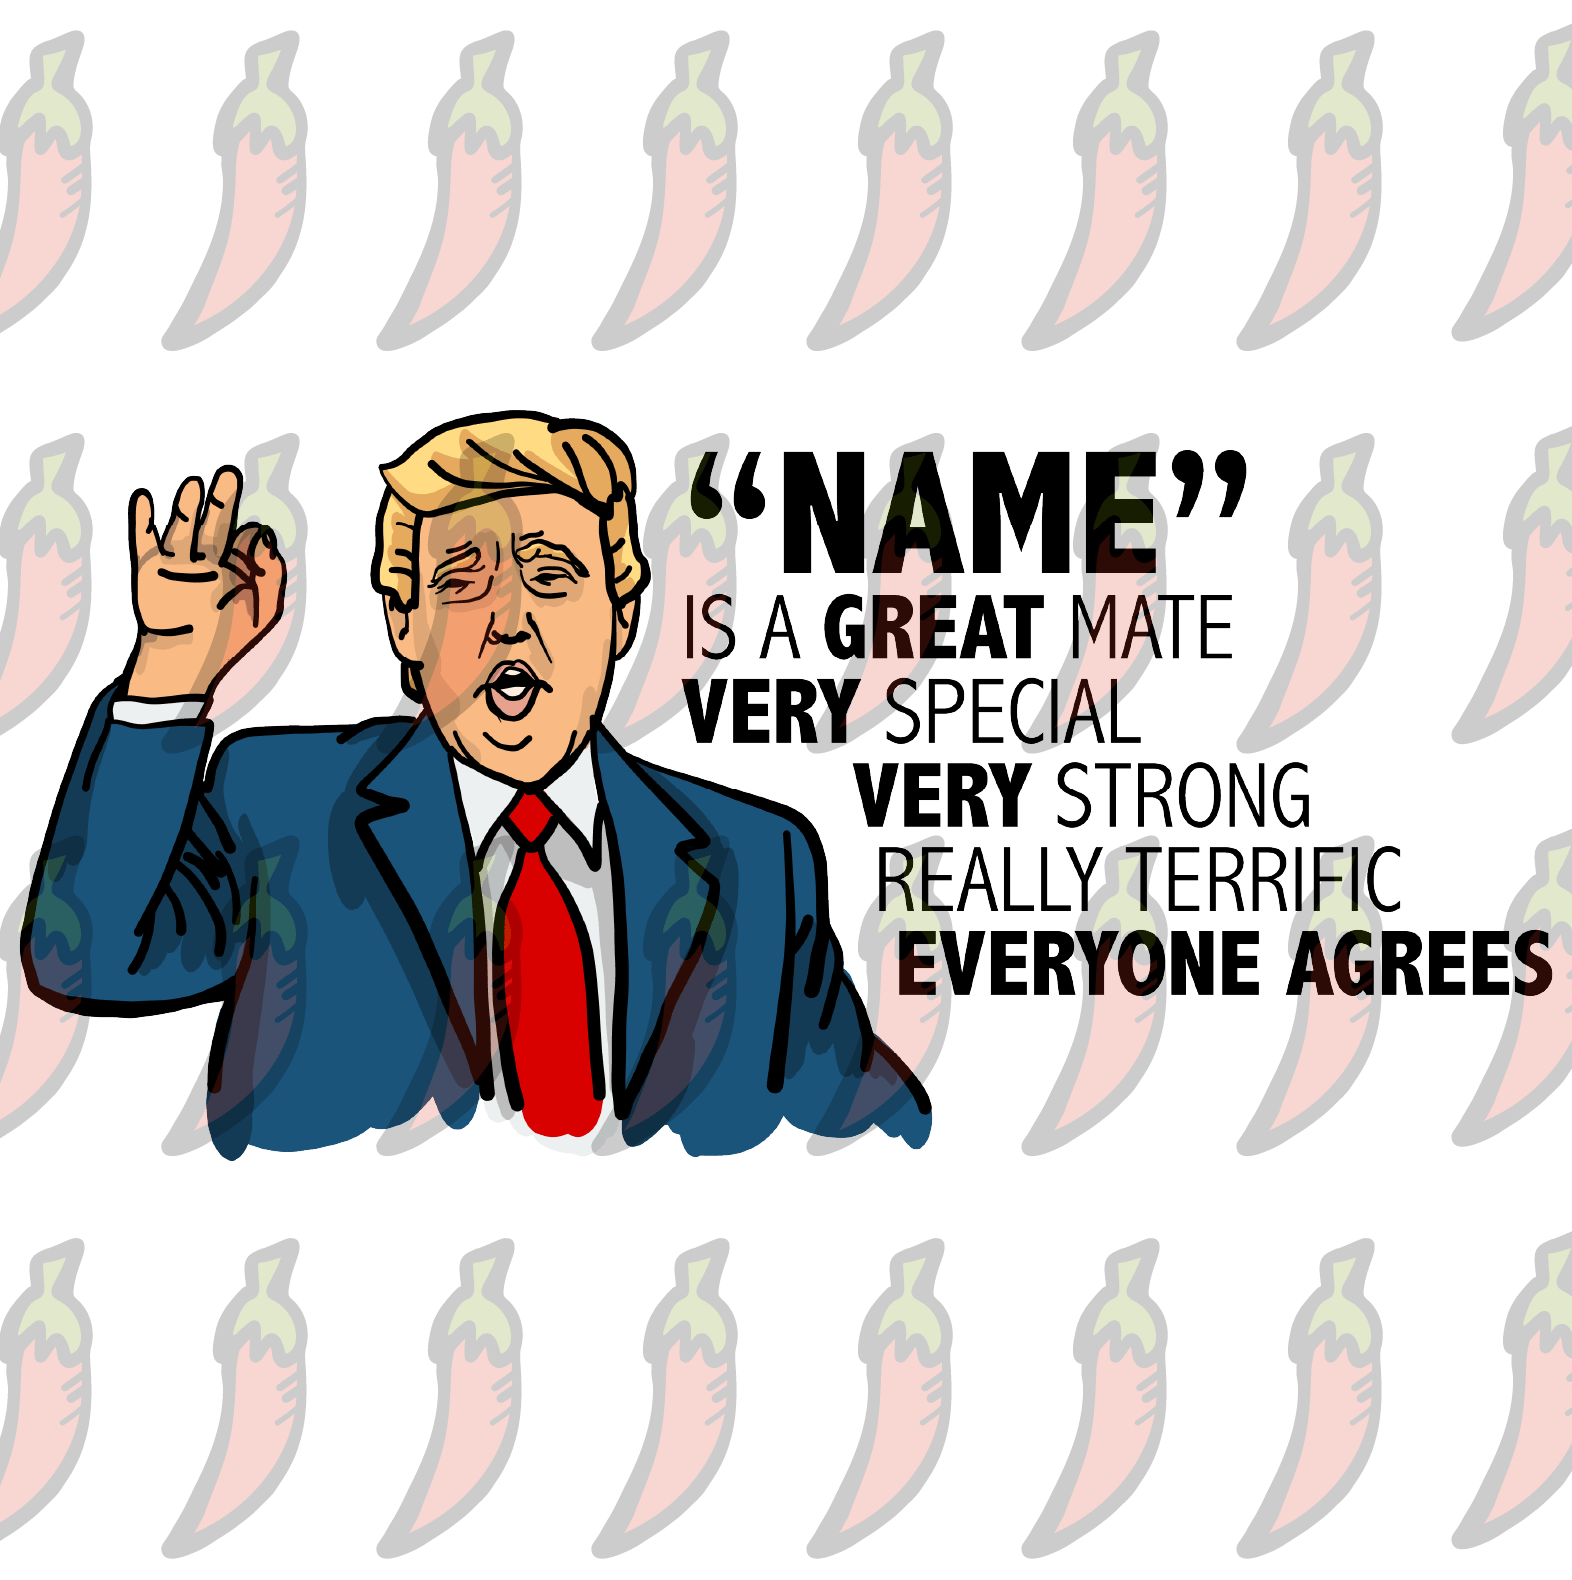 Trump Approves Your Mate 👌 - Personalised Stubby Holder